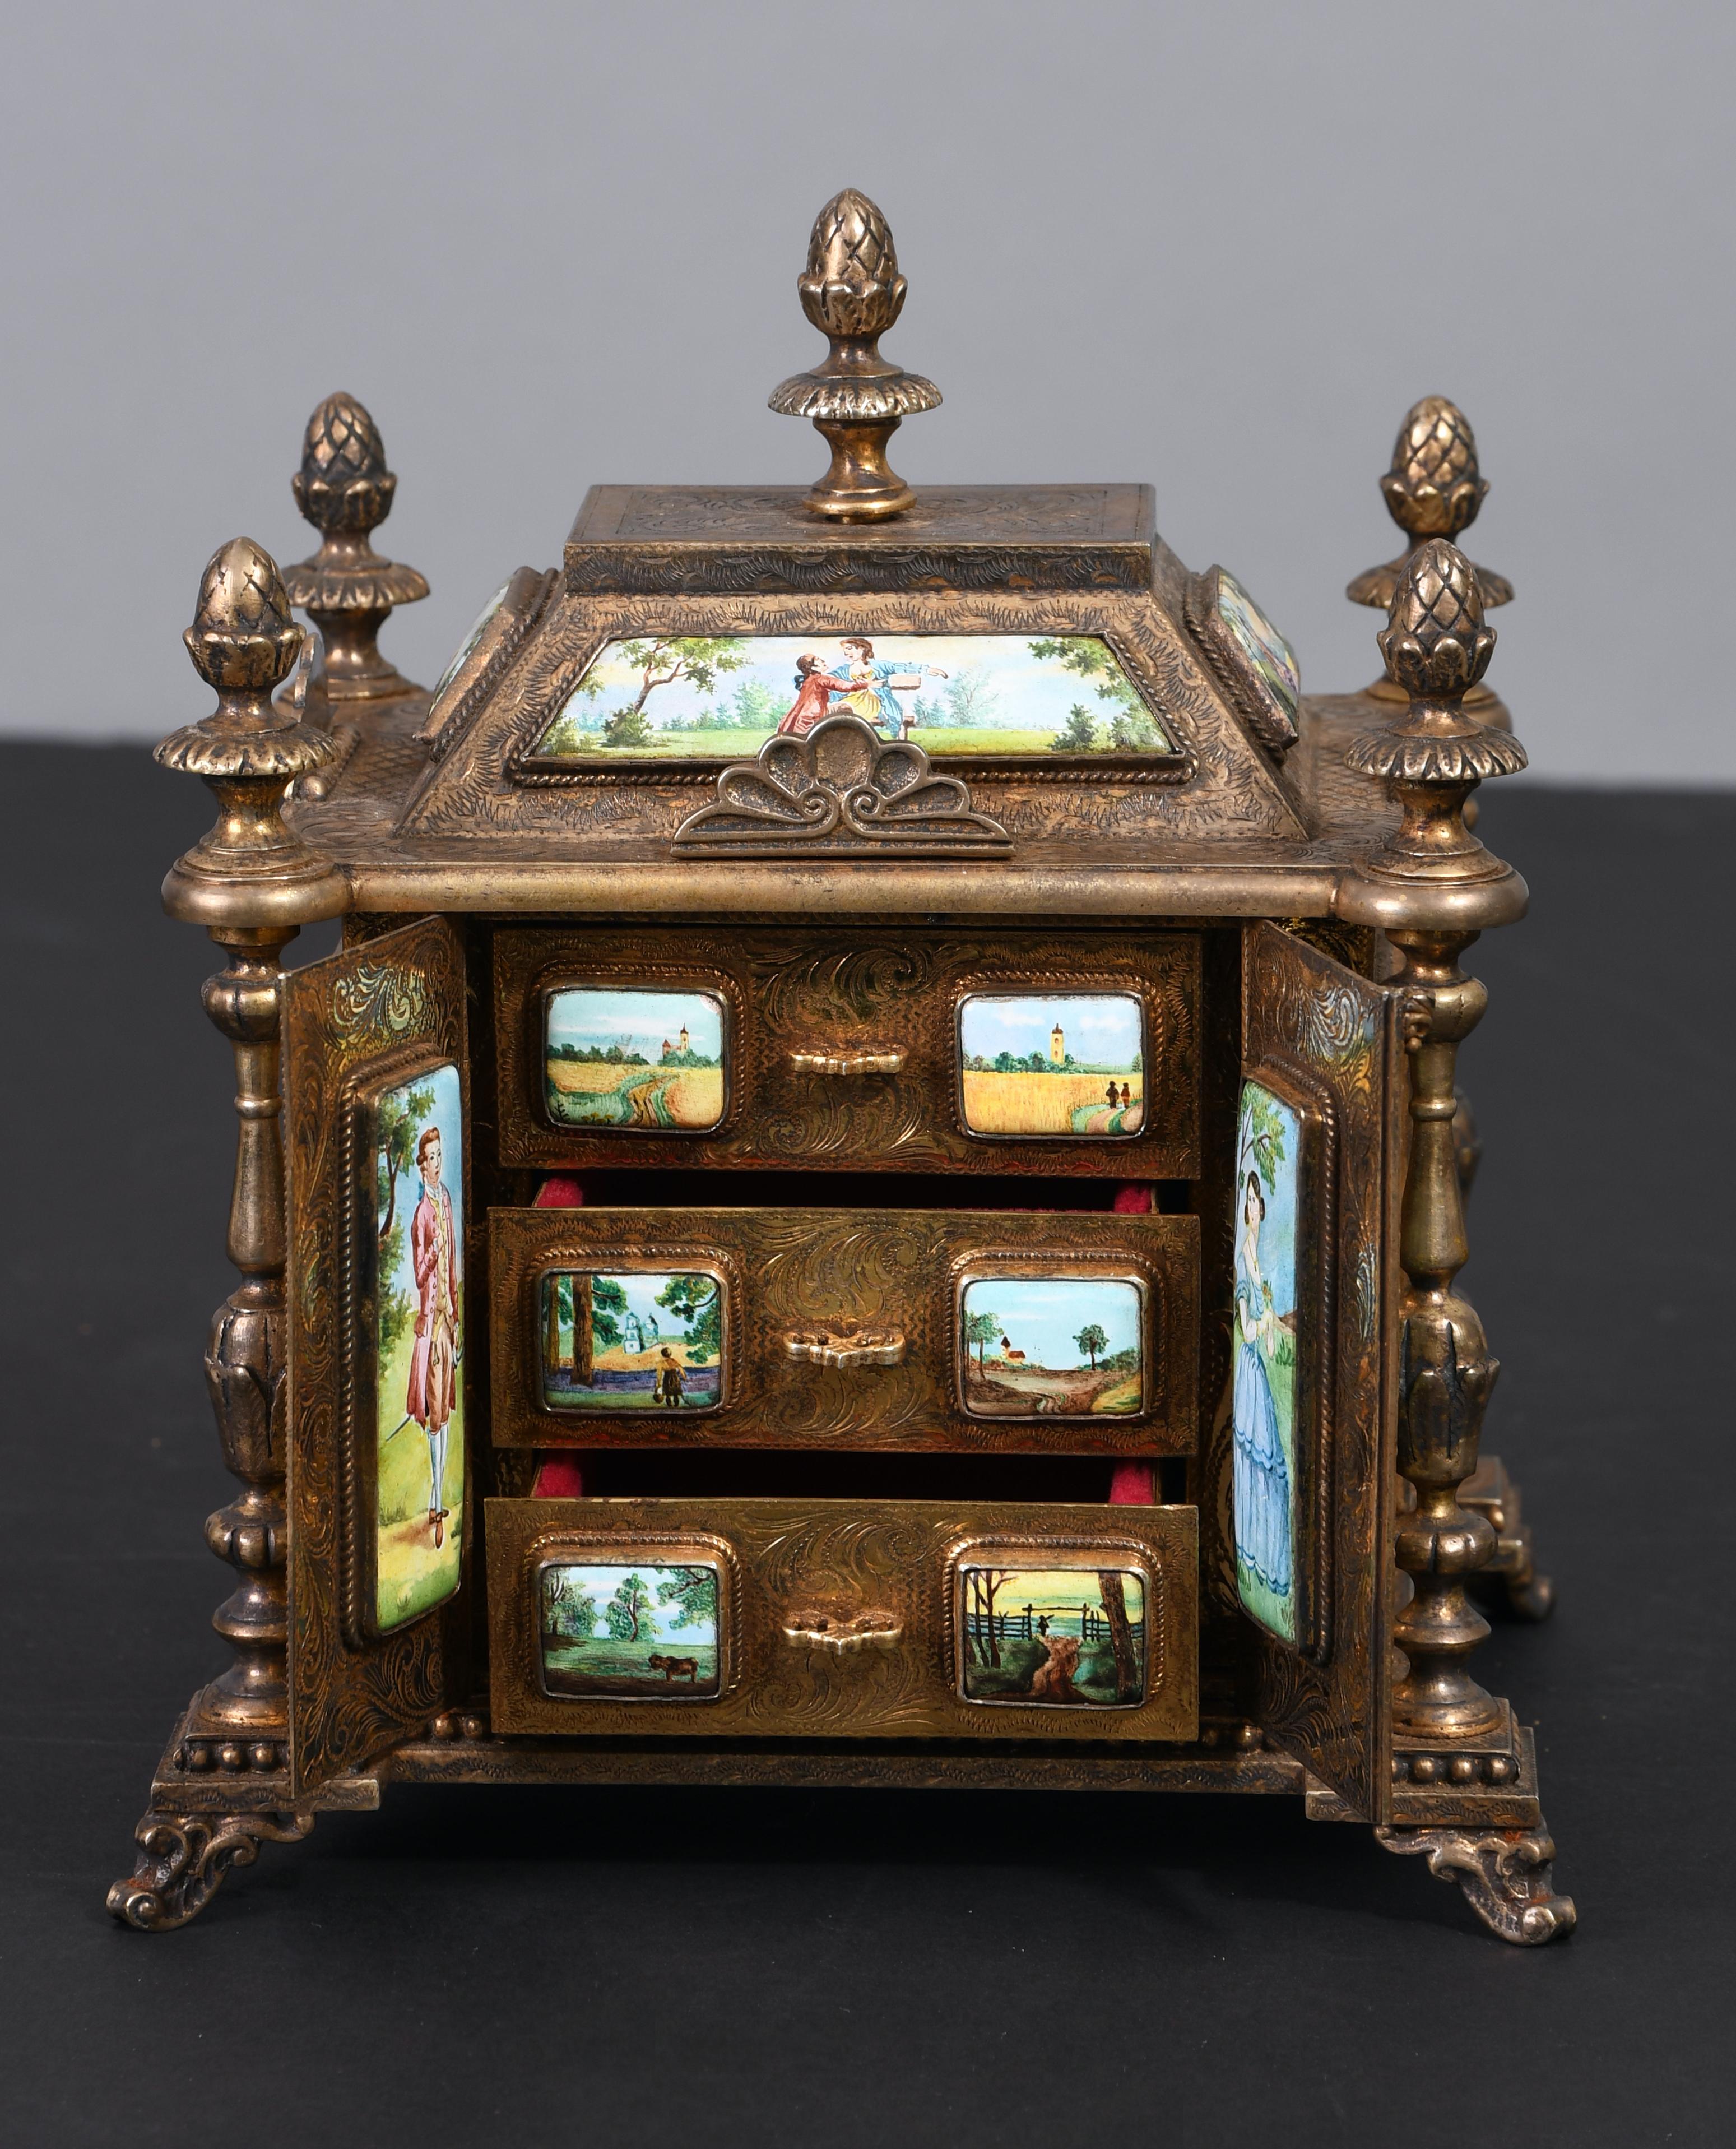 This jewelry box is built similar to a Roman/Greek Pantheon with 17 Silver bordered hand painted enamel panels. The panels are embellished with romantic pastoral couple scenes and portraits of ladies and gentlemen. The walls of the architectural